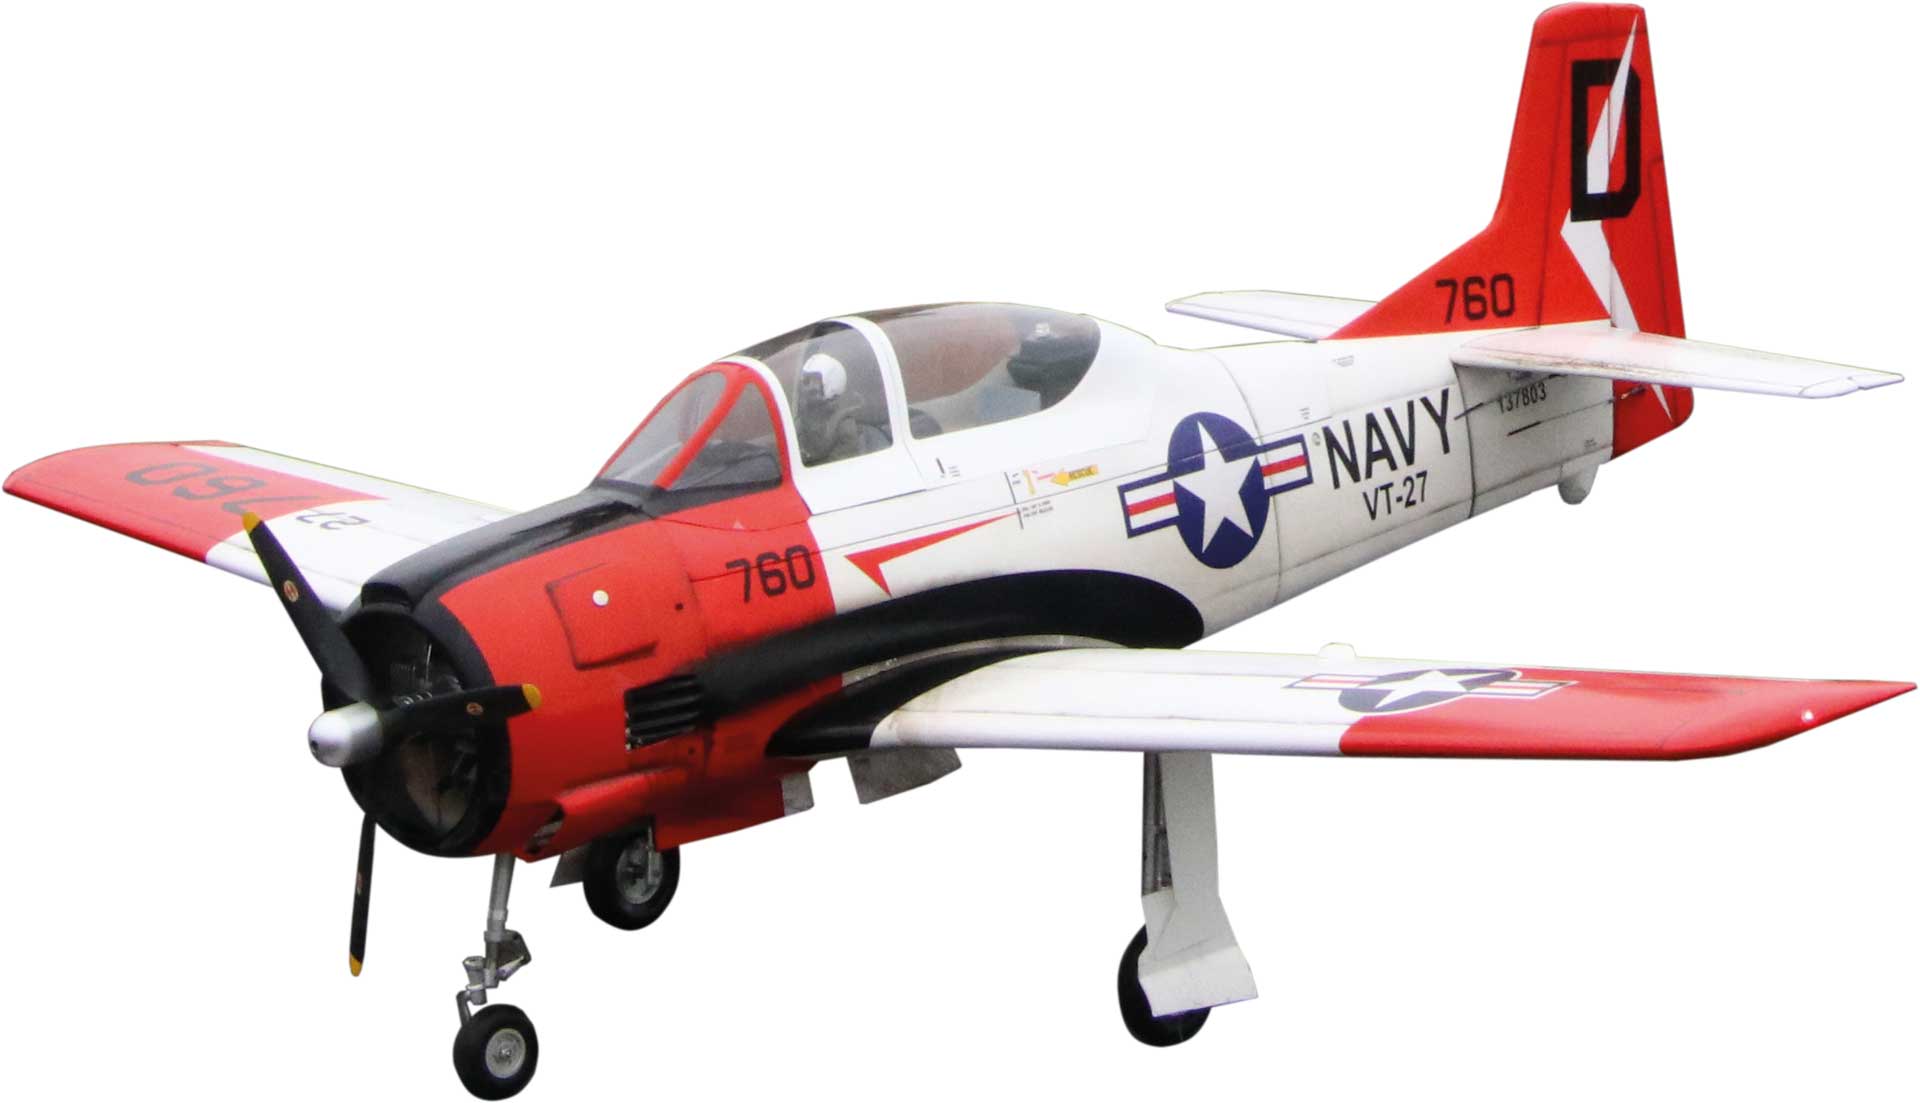 Seagull Models ( SG-Models ) T-28 Trojan 82.5" ARF Warbird Red/White WITHOUT retractable undercarriage